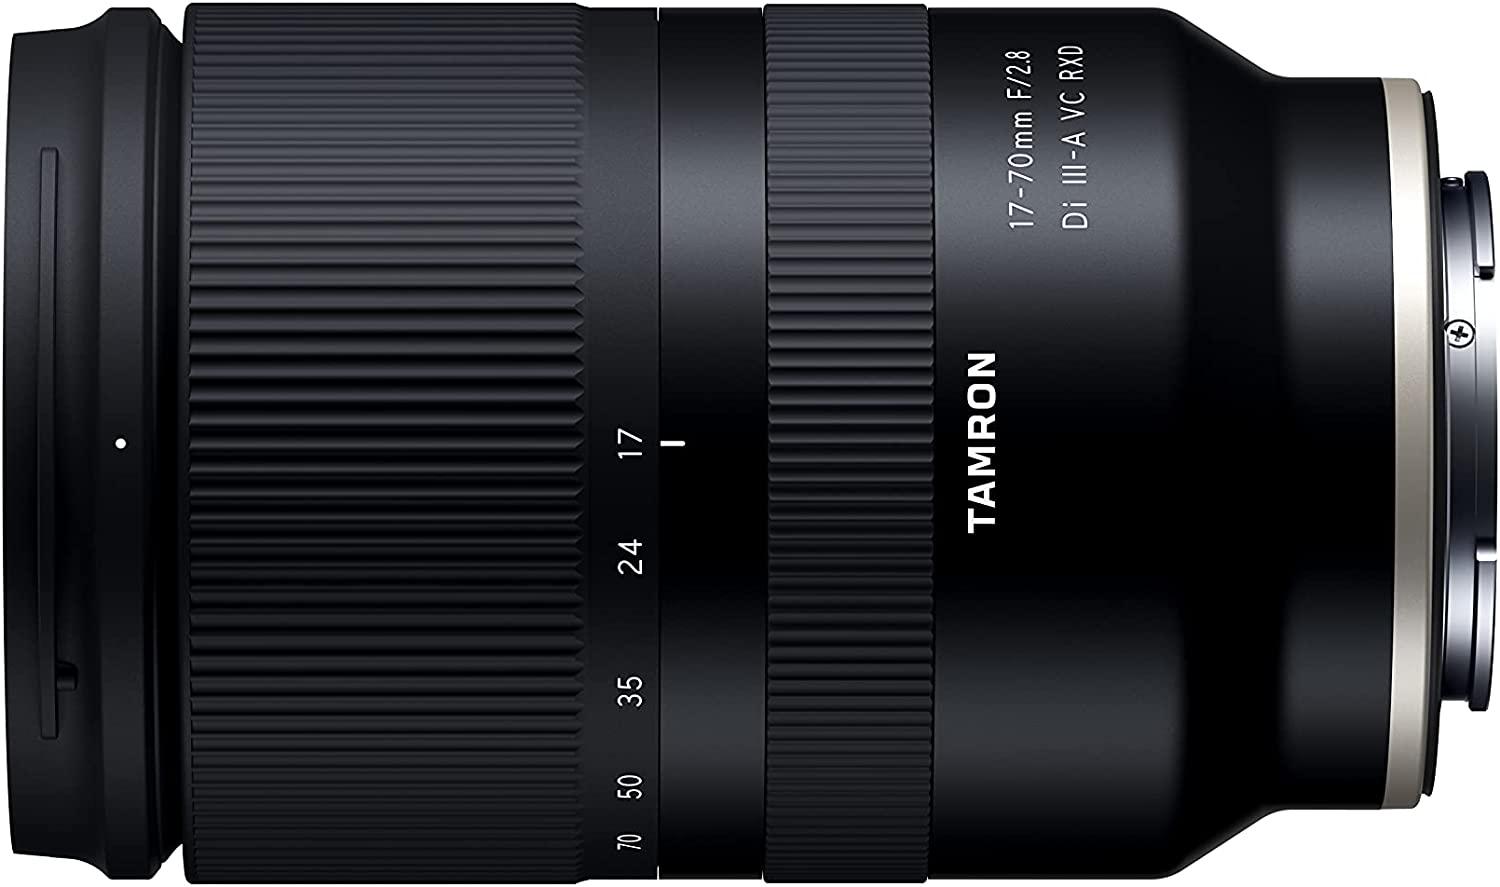 Tamron 17-70mm F/2.8 Di III-A VC RXD Lens for Sony E - The Camera